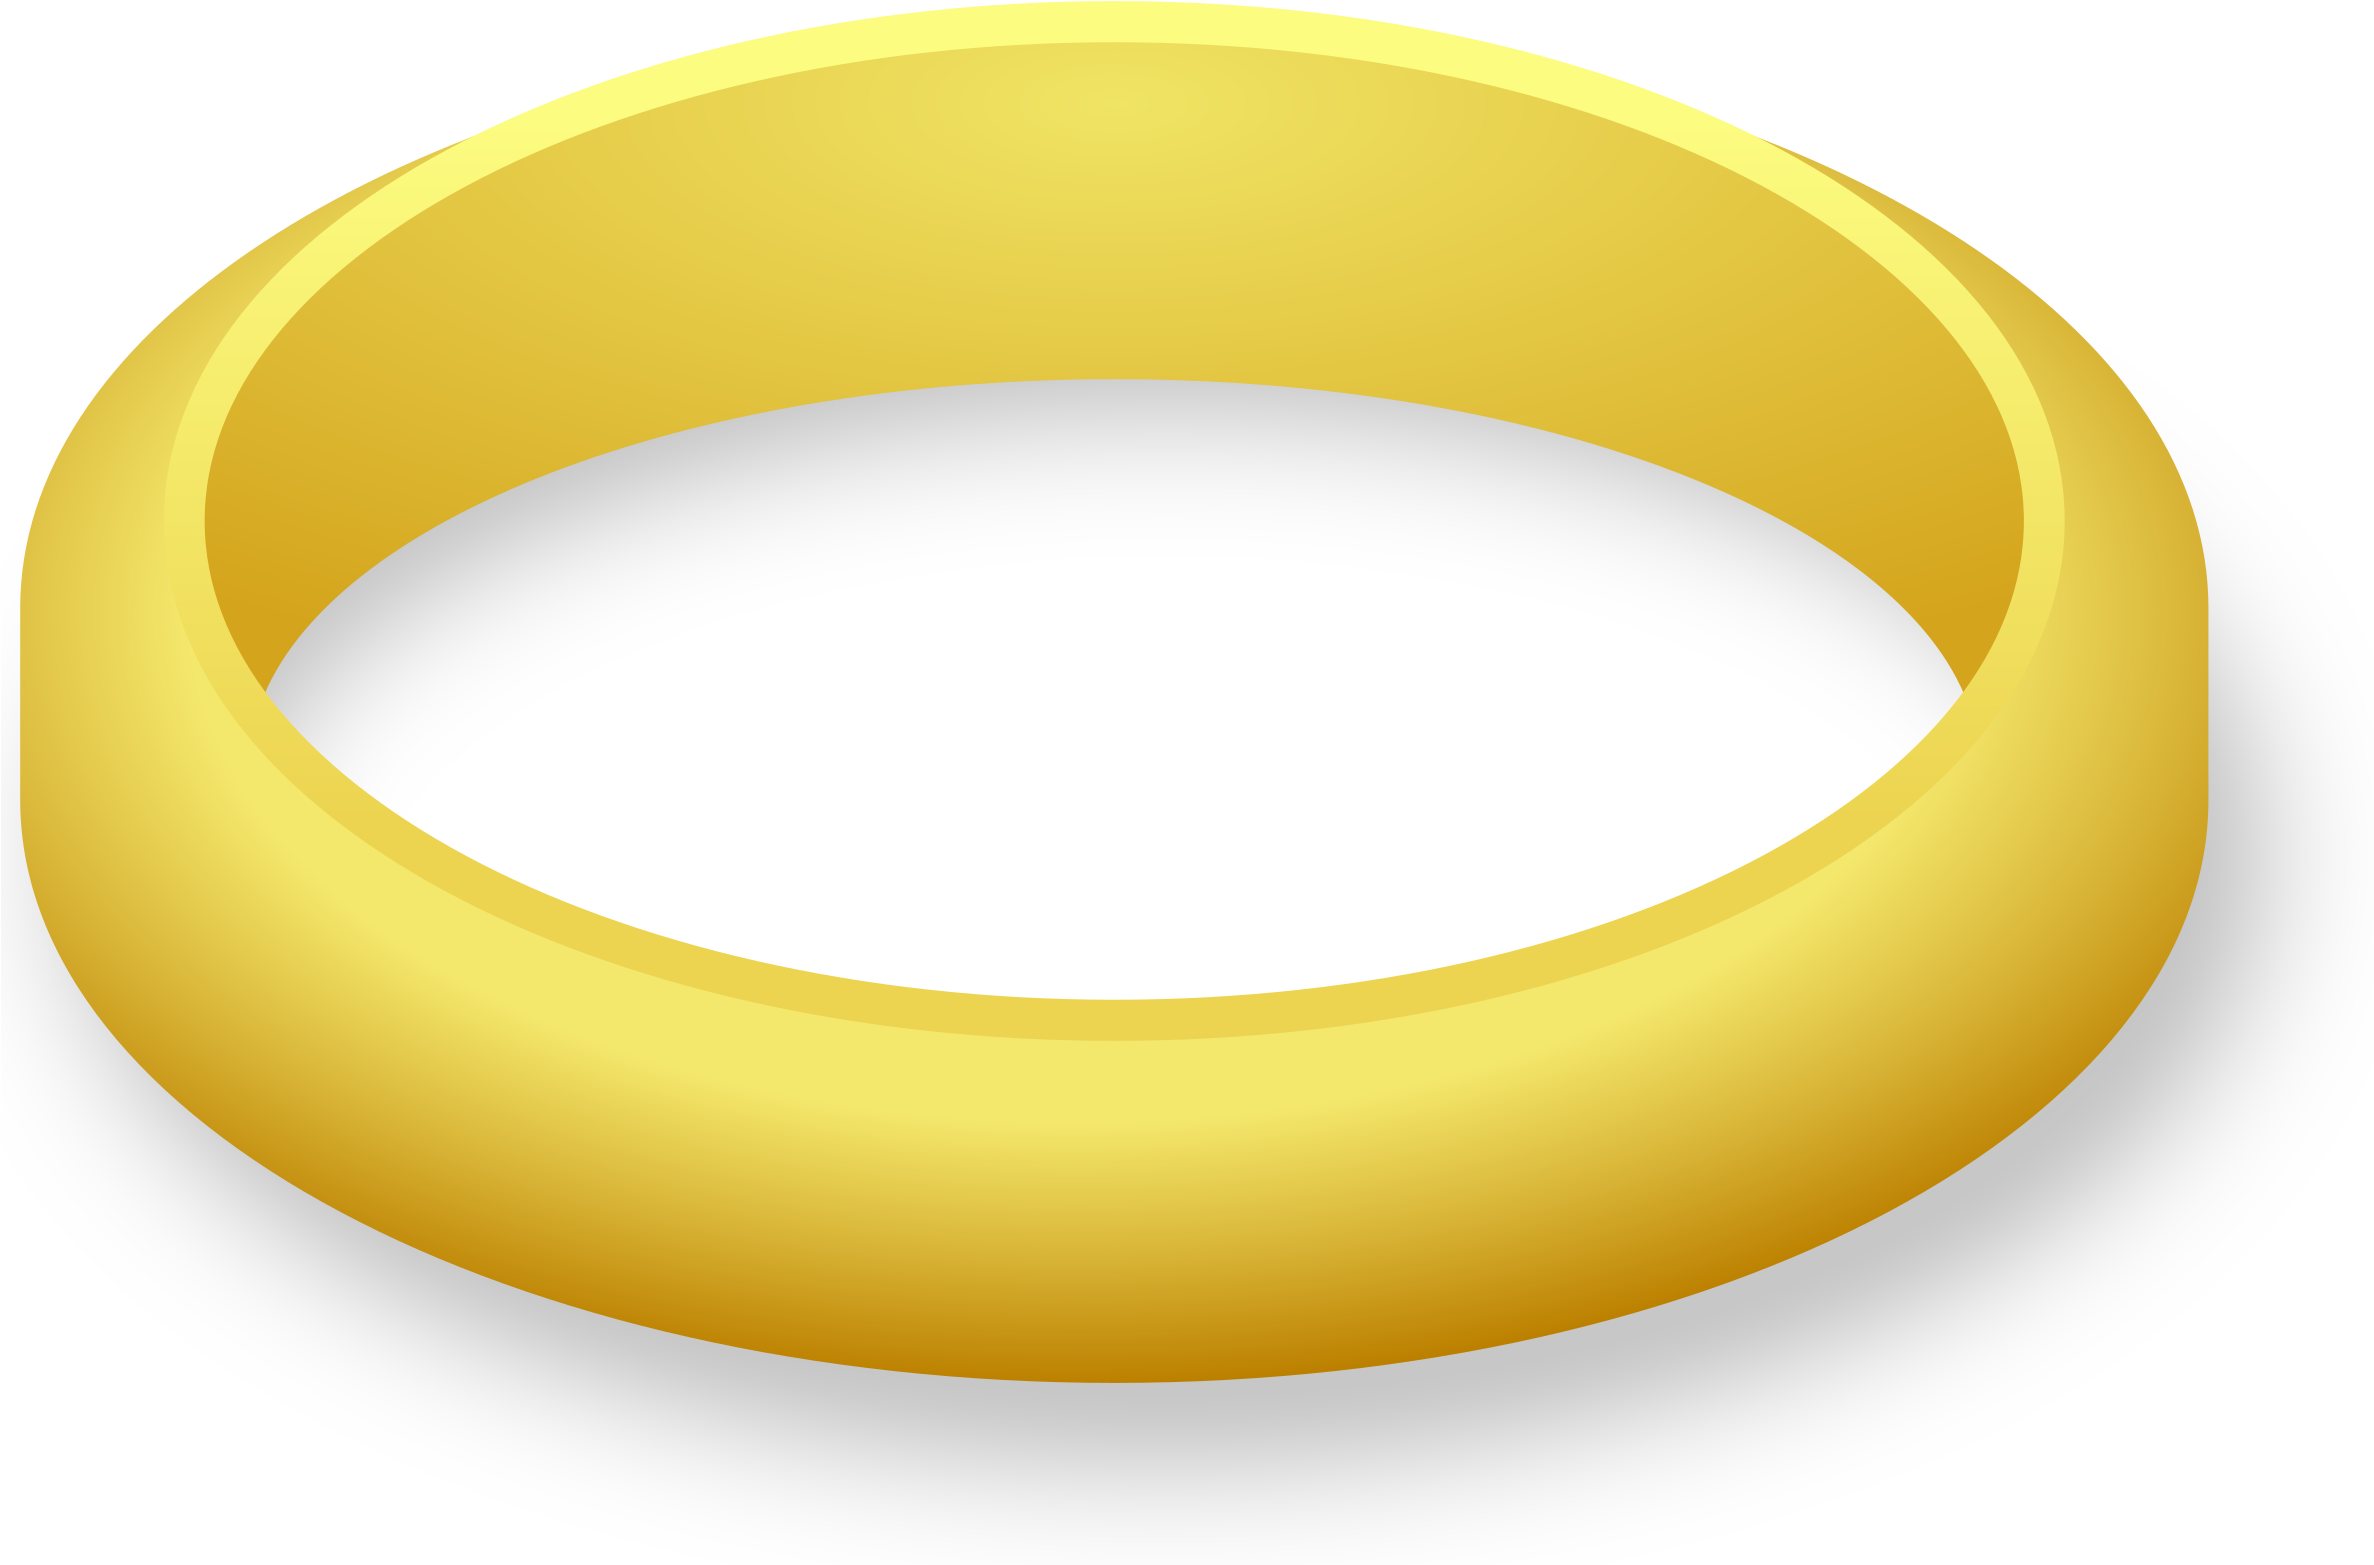 A Yellow Ring With Black Background